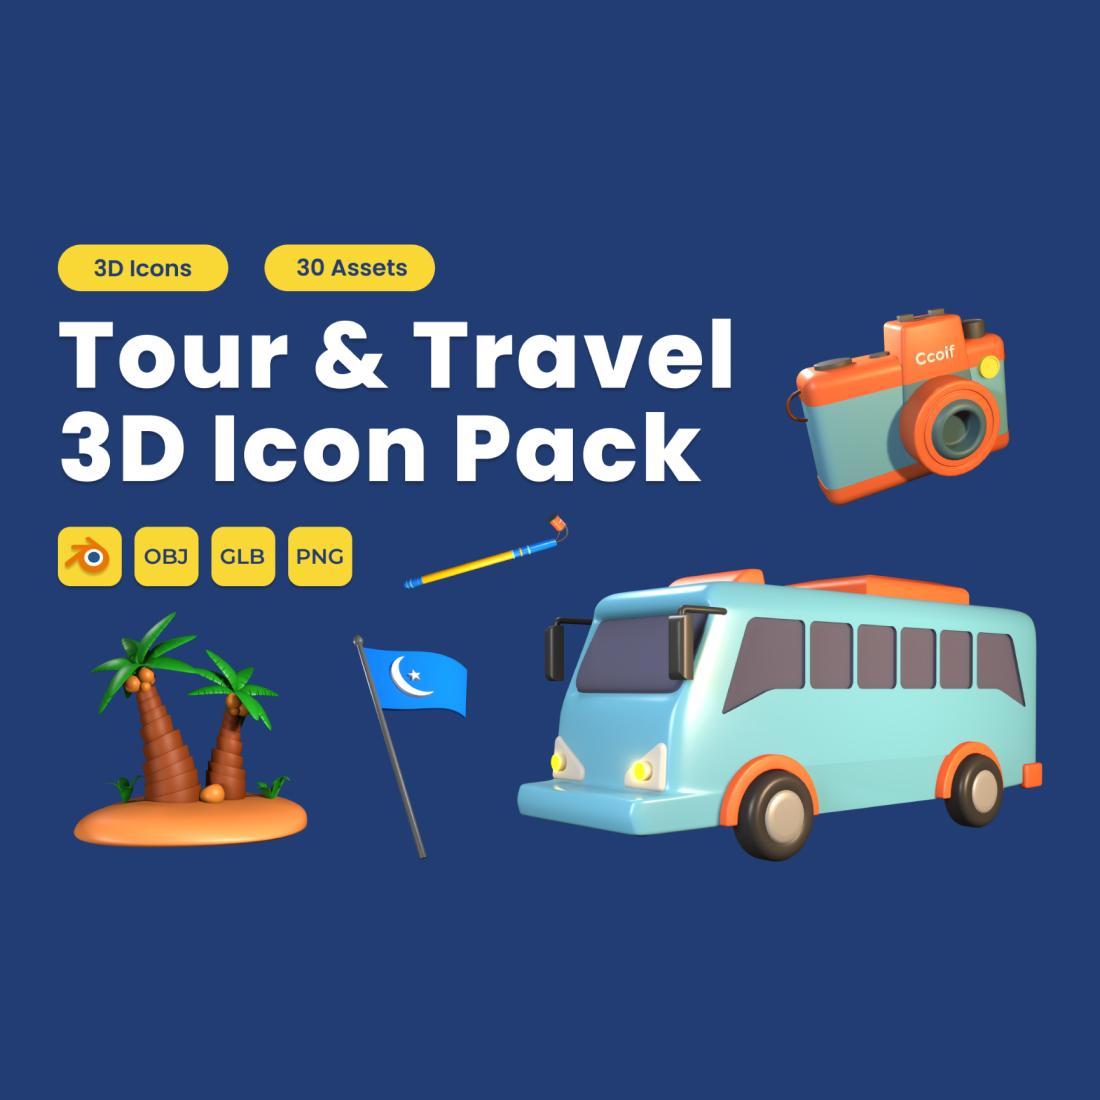 Tour and Travel 3D Icon Pack Vol 3 cover image.